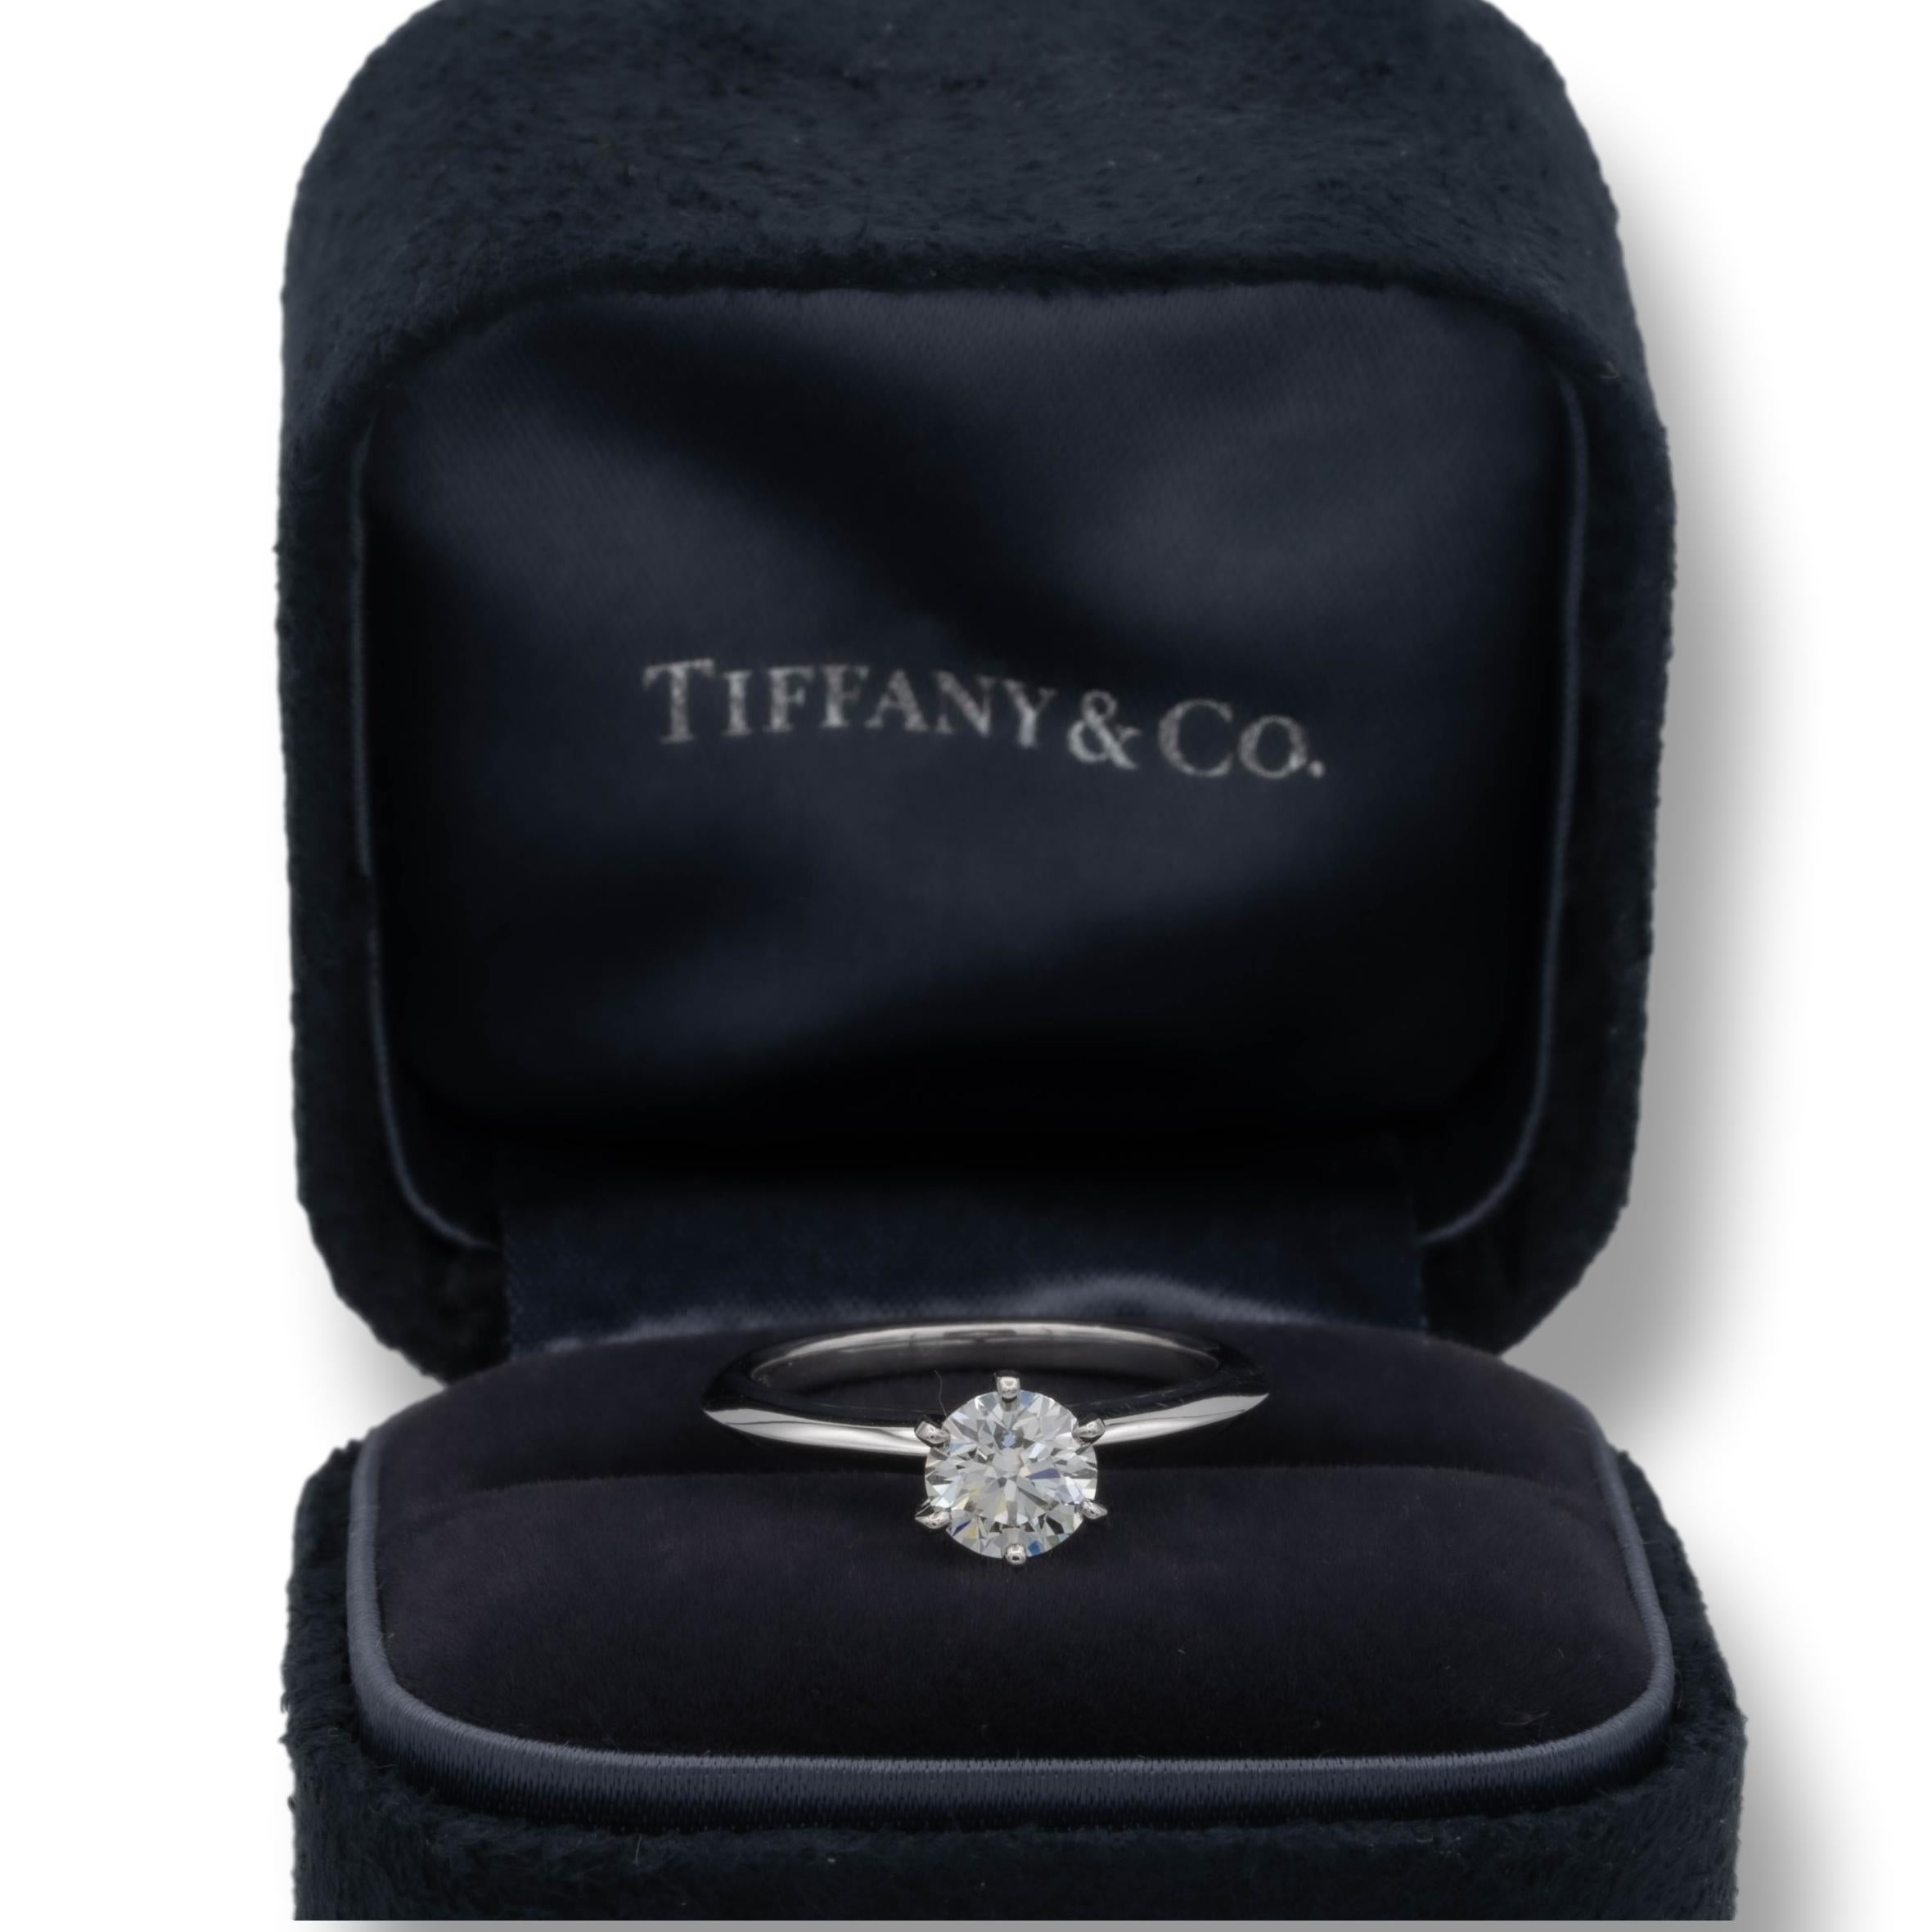 Tiffany & Co. Solitaire Diamond Engagement Ring .80 Ct Round Center IVVS1 Plat 1